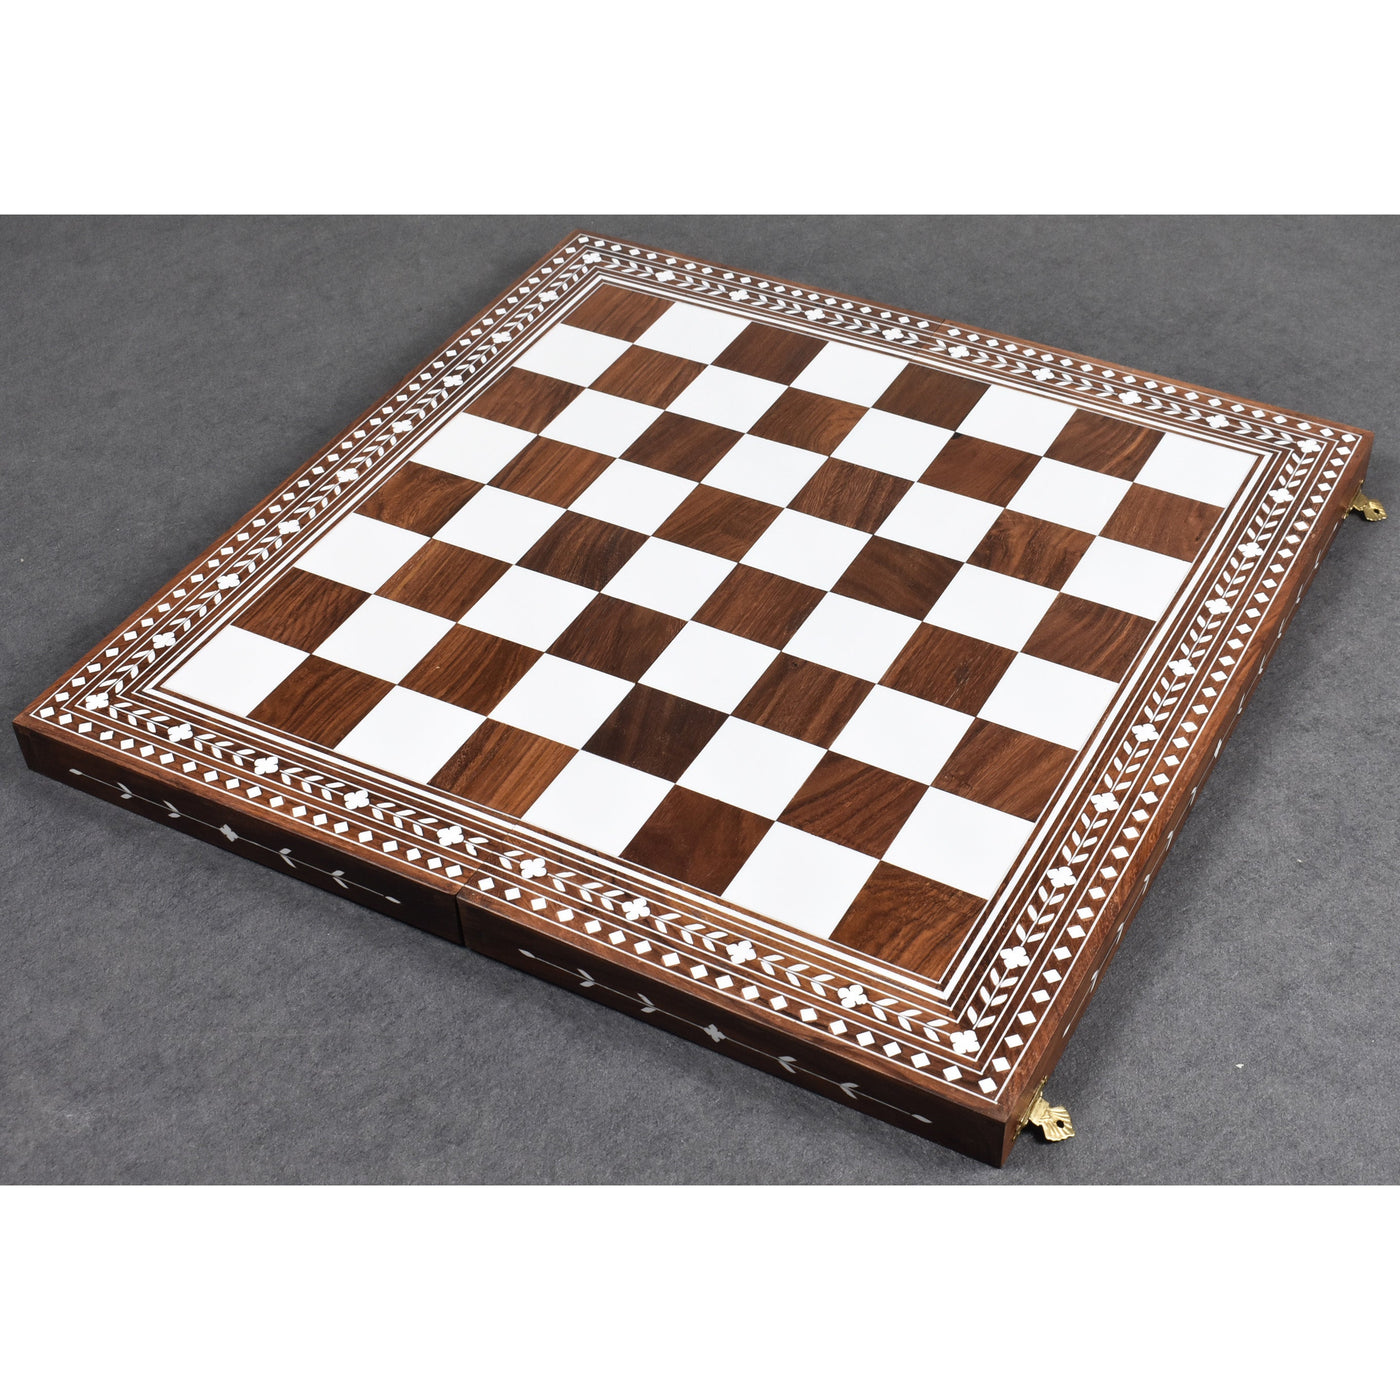 Buy Solid Sheesham & Acrylic Ivory Inlaid Wooden Folding Chess board online